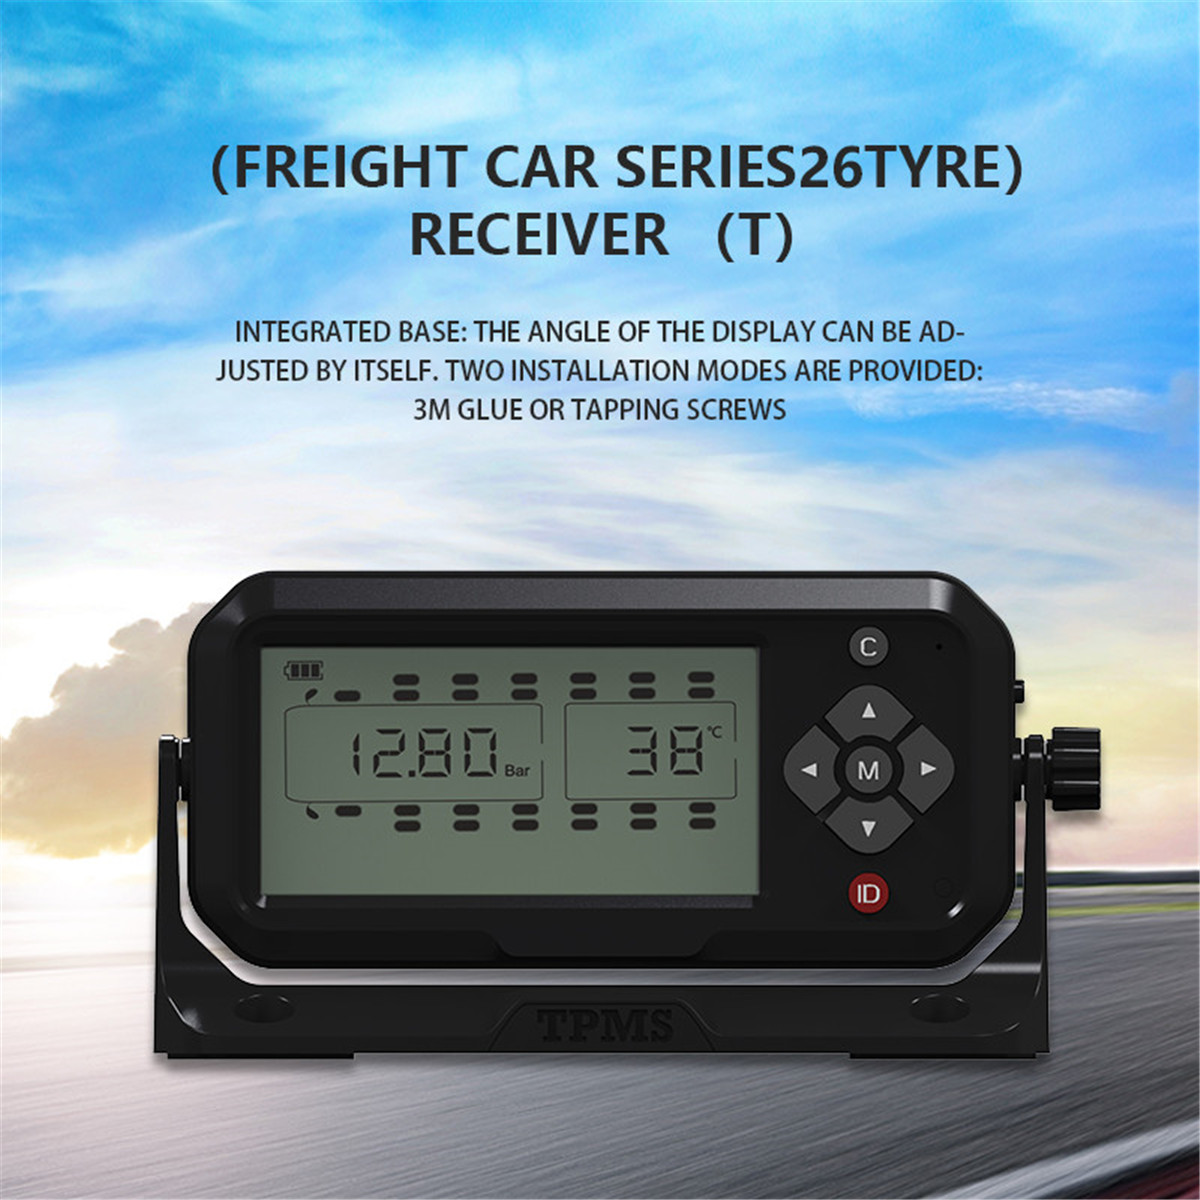 ( Freight car series26tyre) Receiver (8)